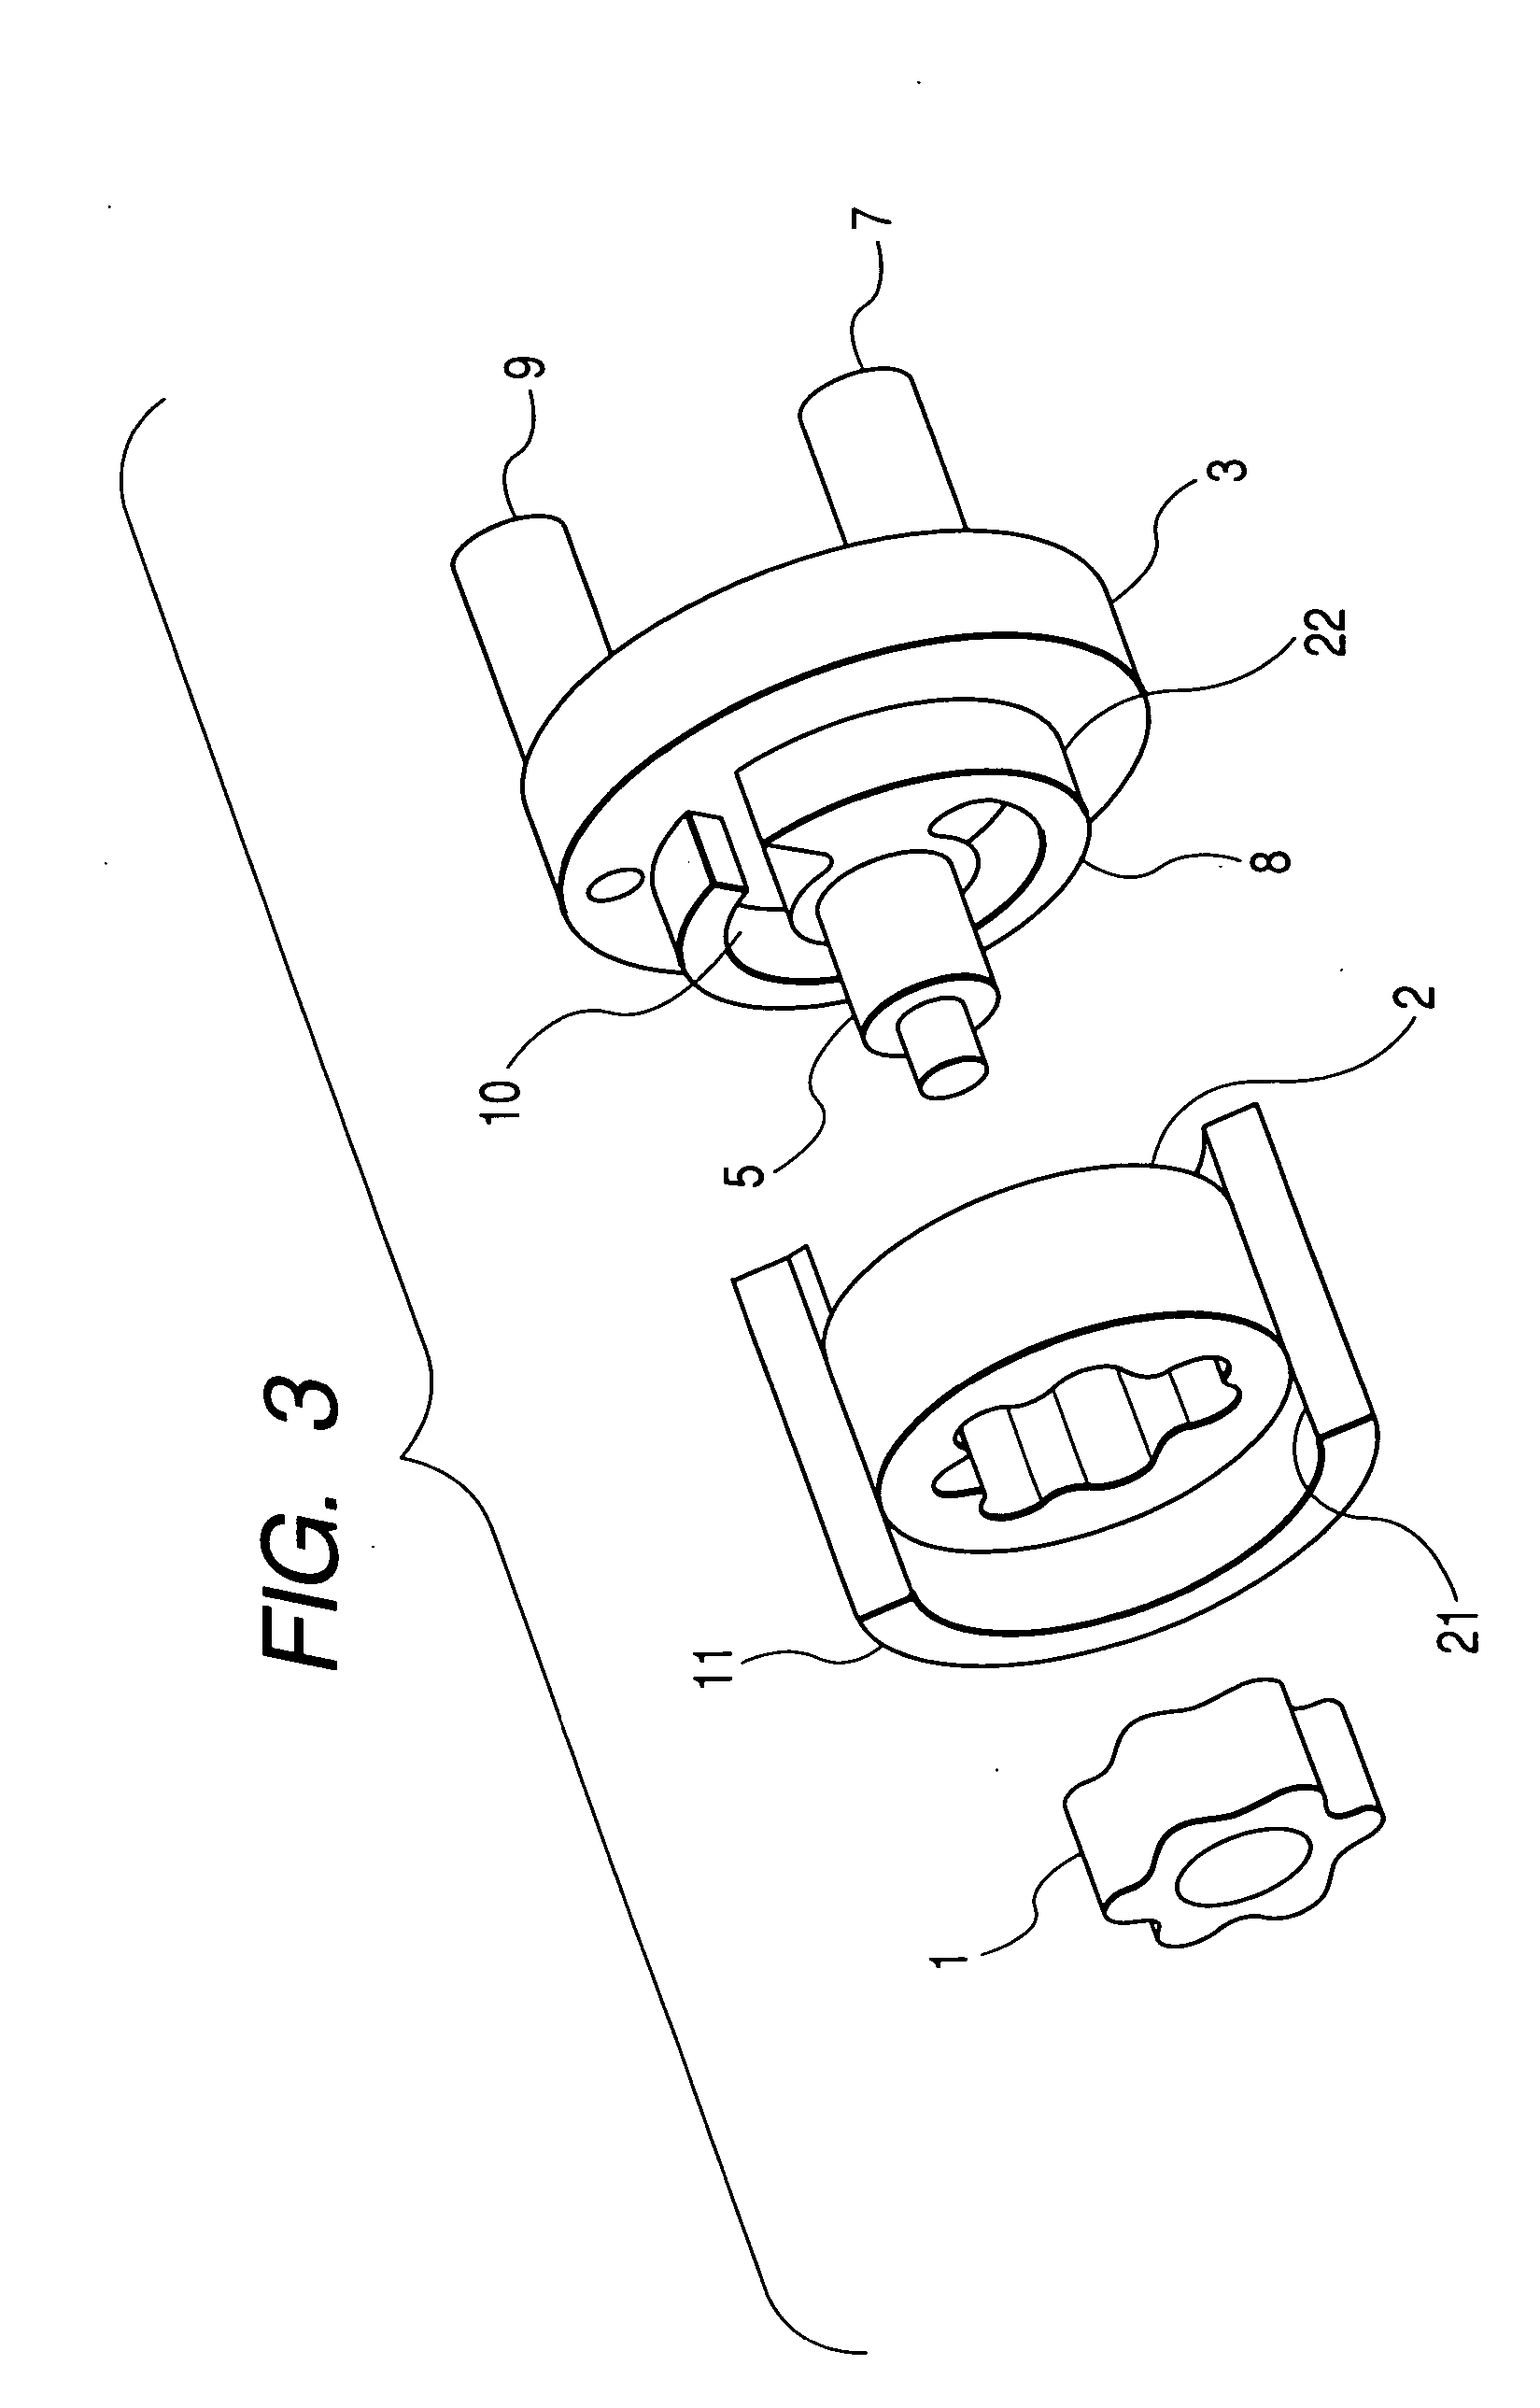 Motor-mounted internal gear pump and electronic device